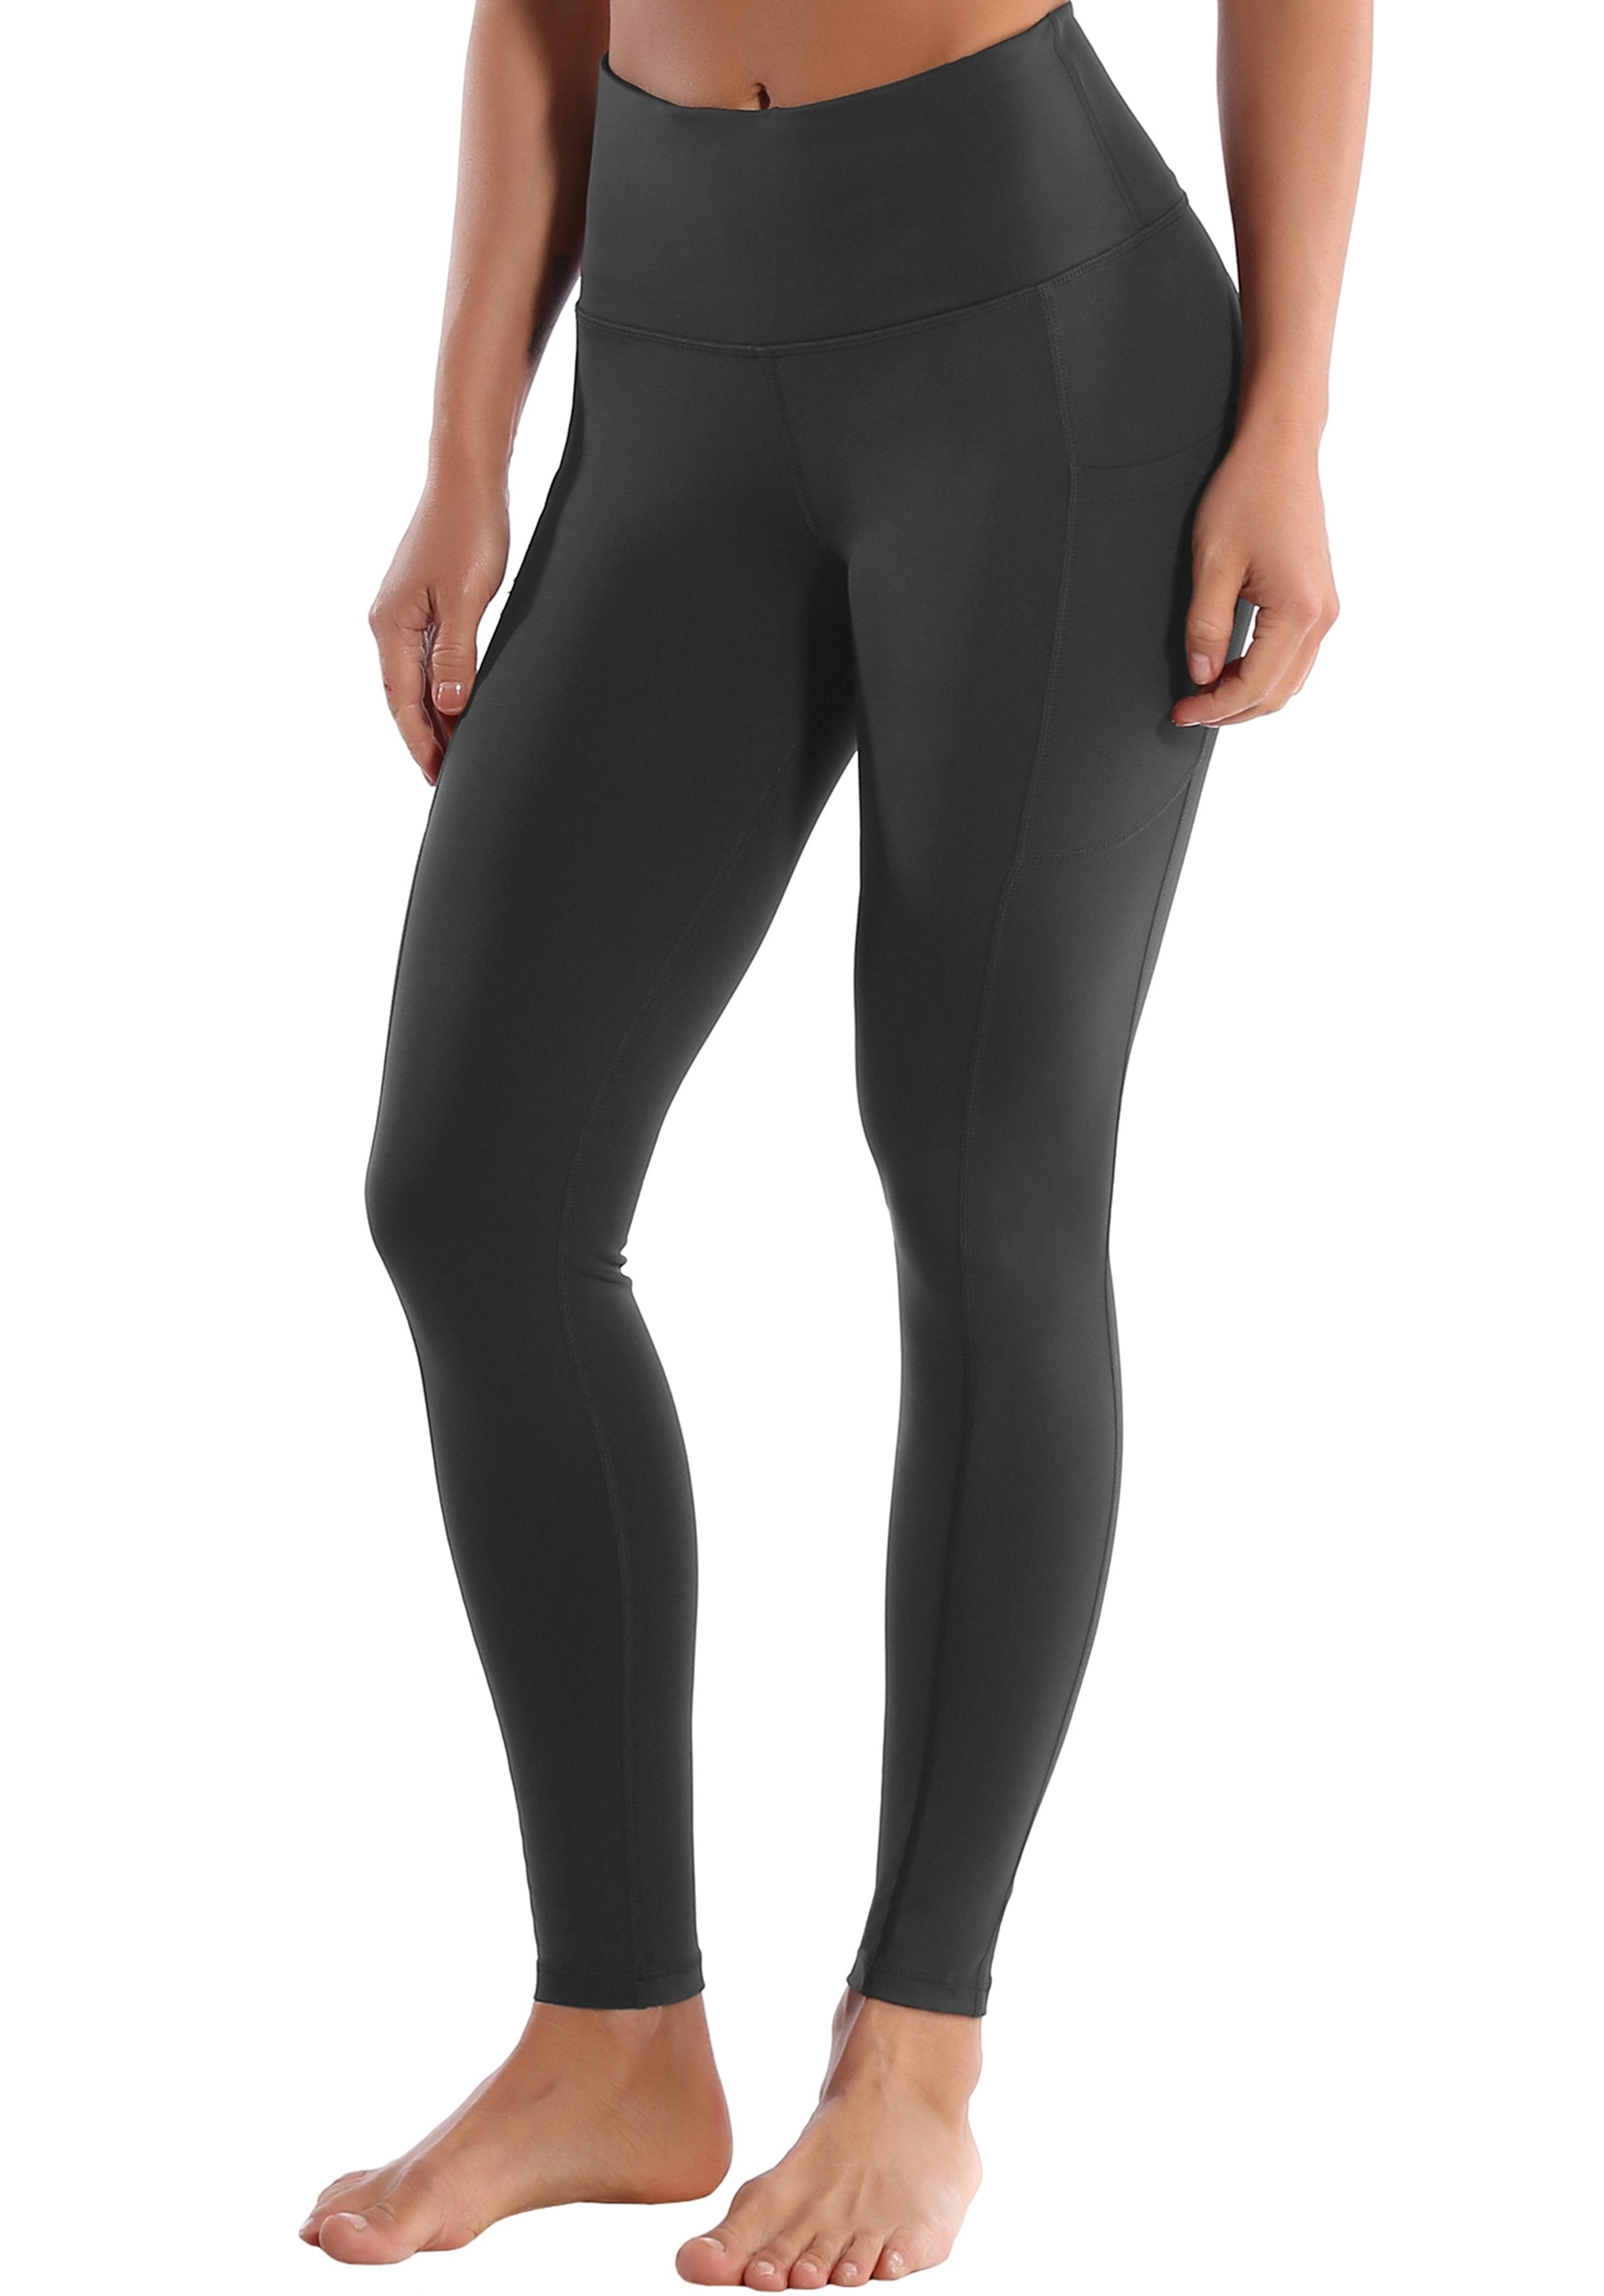 Hip Line Side Pockets Running Pants shadowcharcoal Sexy Hip Line Side Pockets 75%Nylon/25%Spandex Fabric doesn't attract lint easily 4-way stretch No see-through Moisture-wicking Tummy control Inner pocket Two lengths